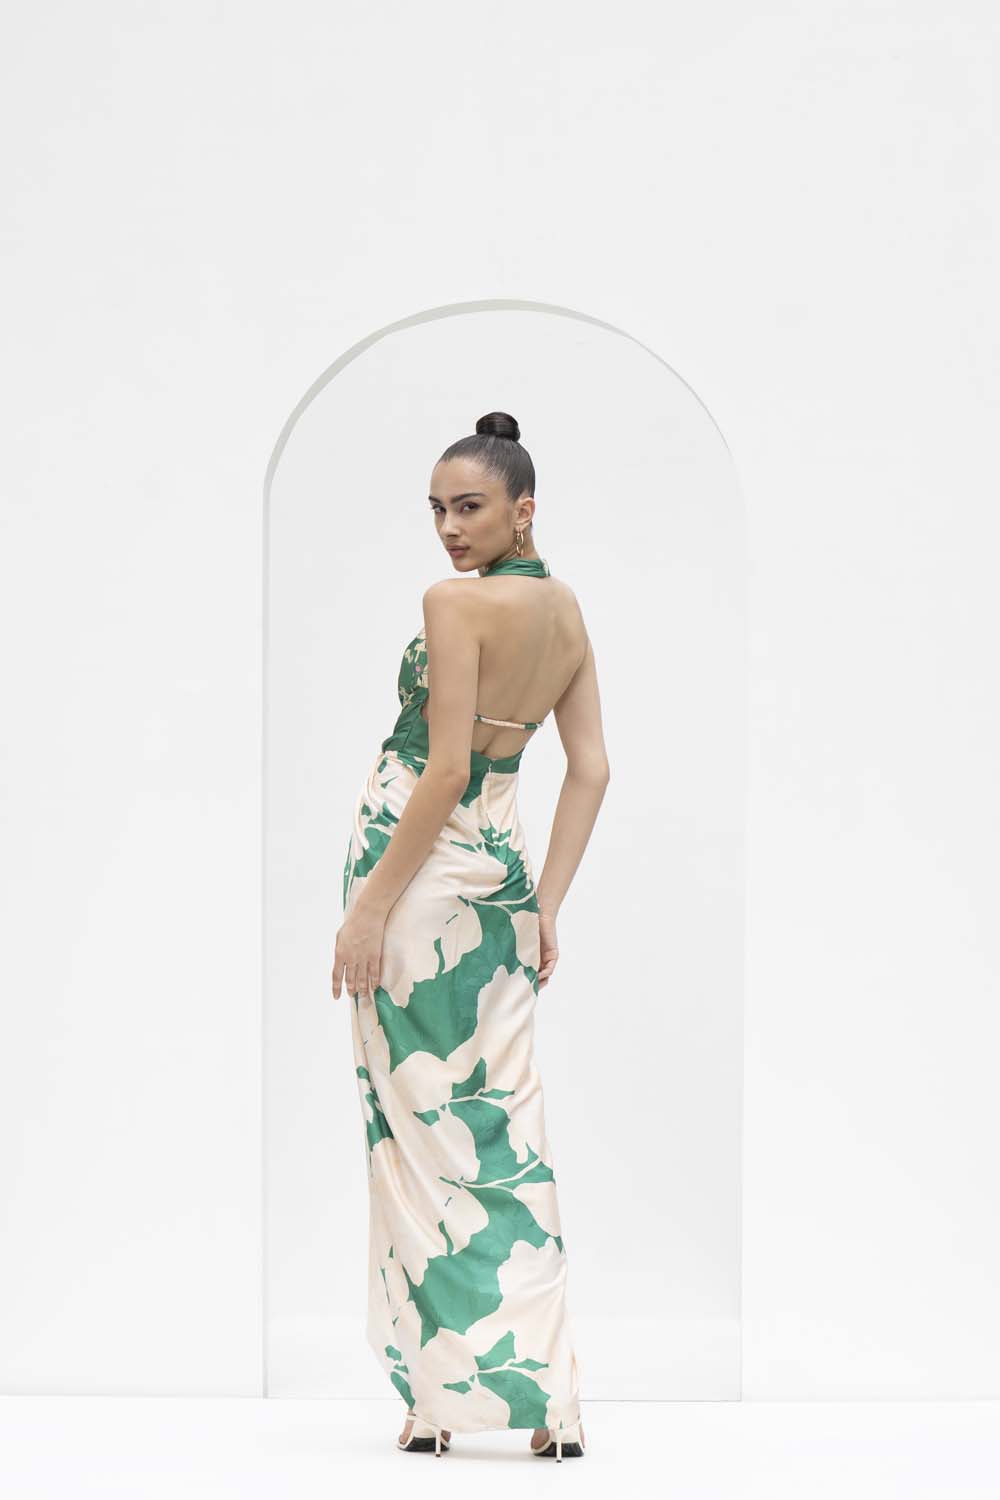 Mystic green placement printed draped halter neck dress made with lustrous satin.